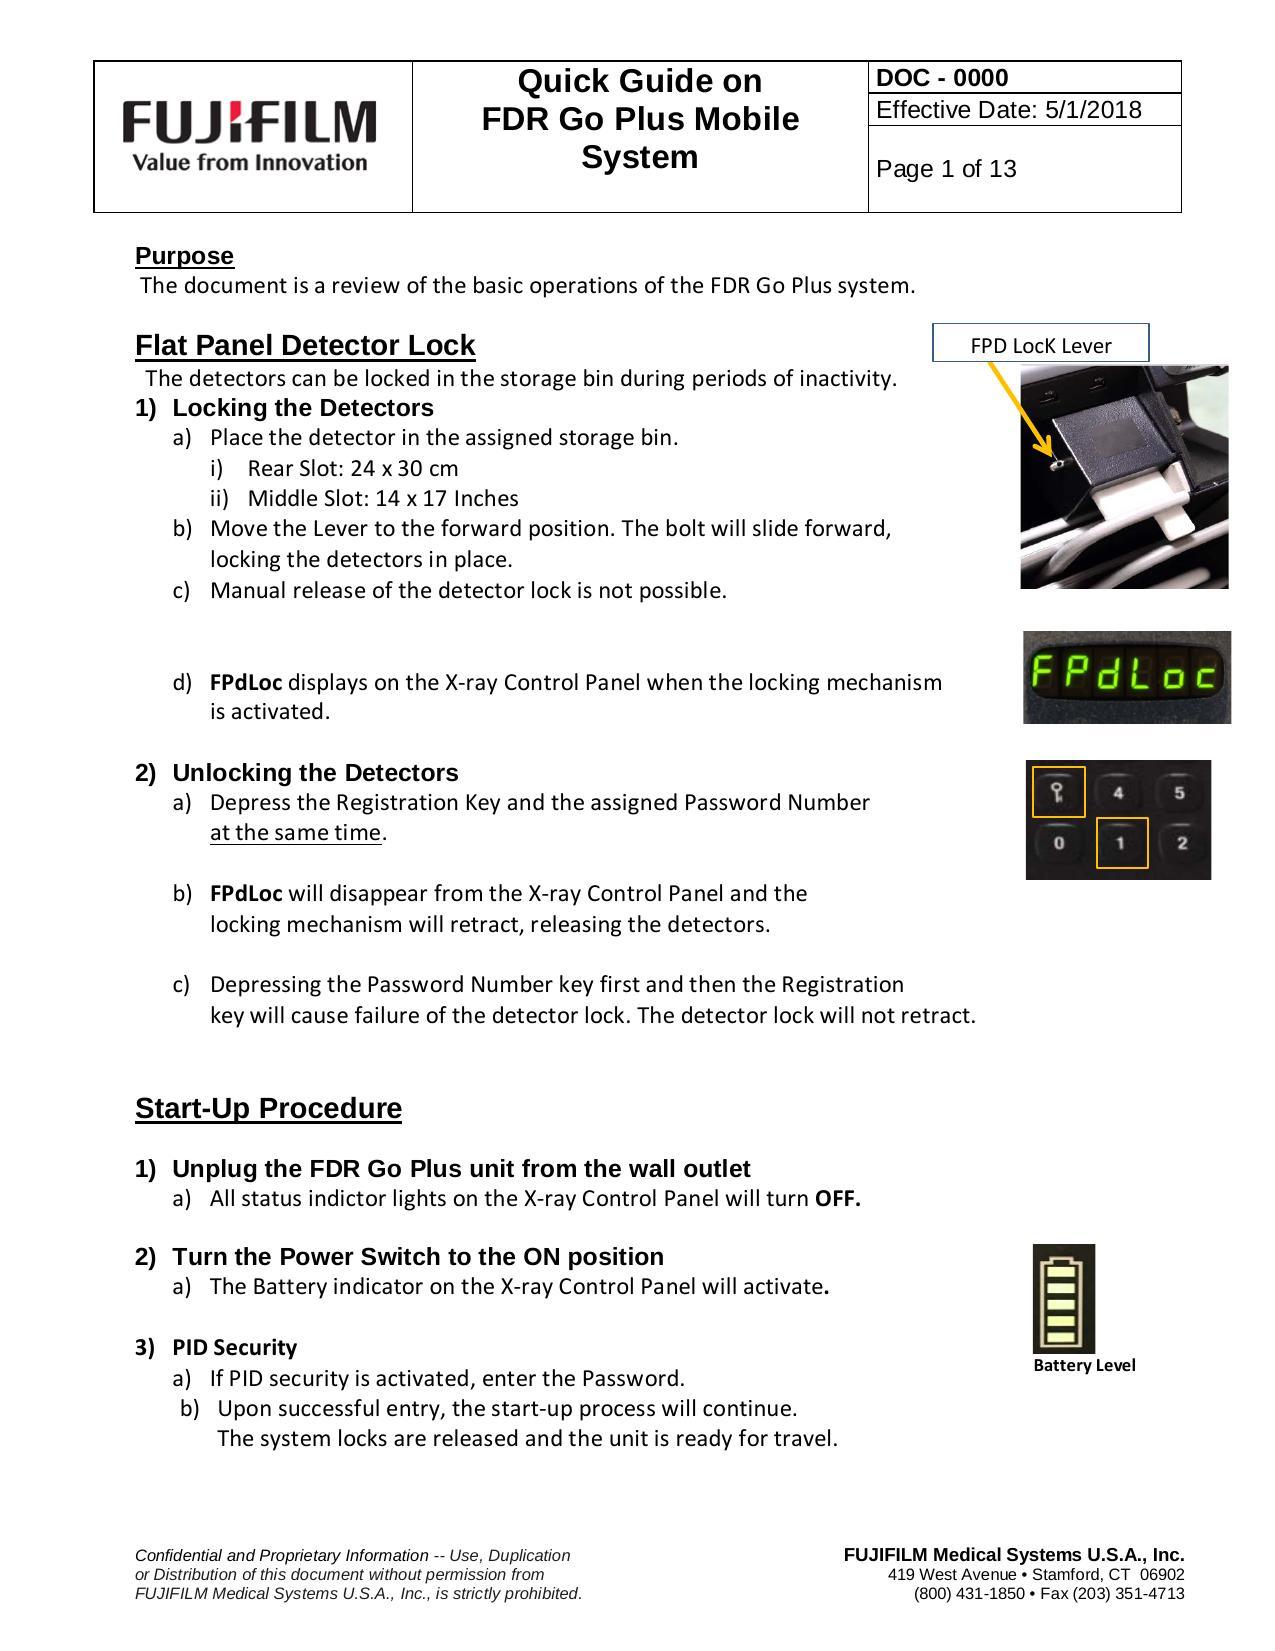 quick-guide-on-fdr-go-plus-mobile-system.pdf